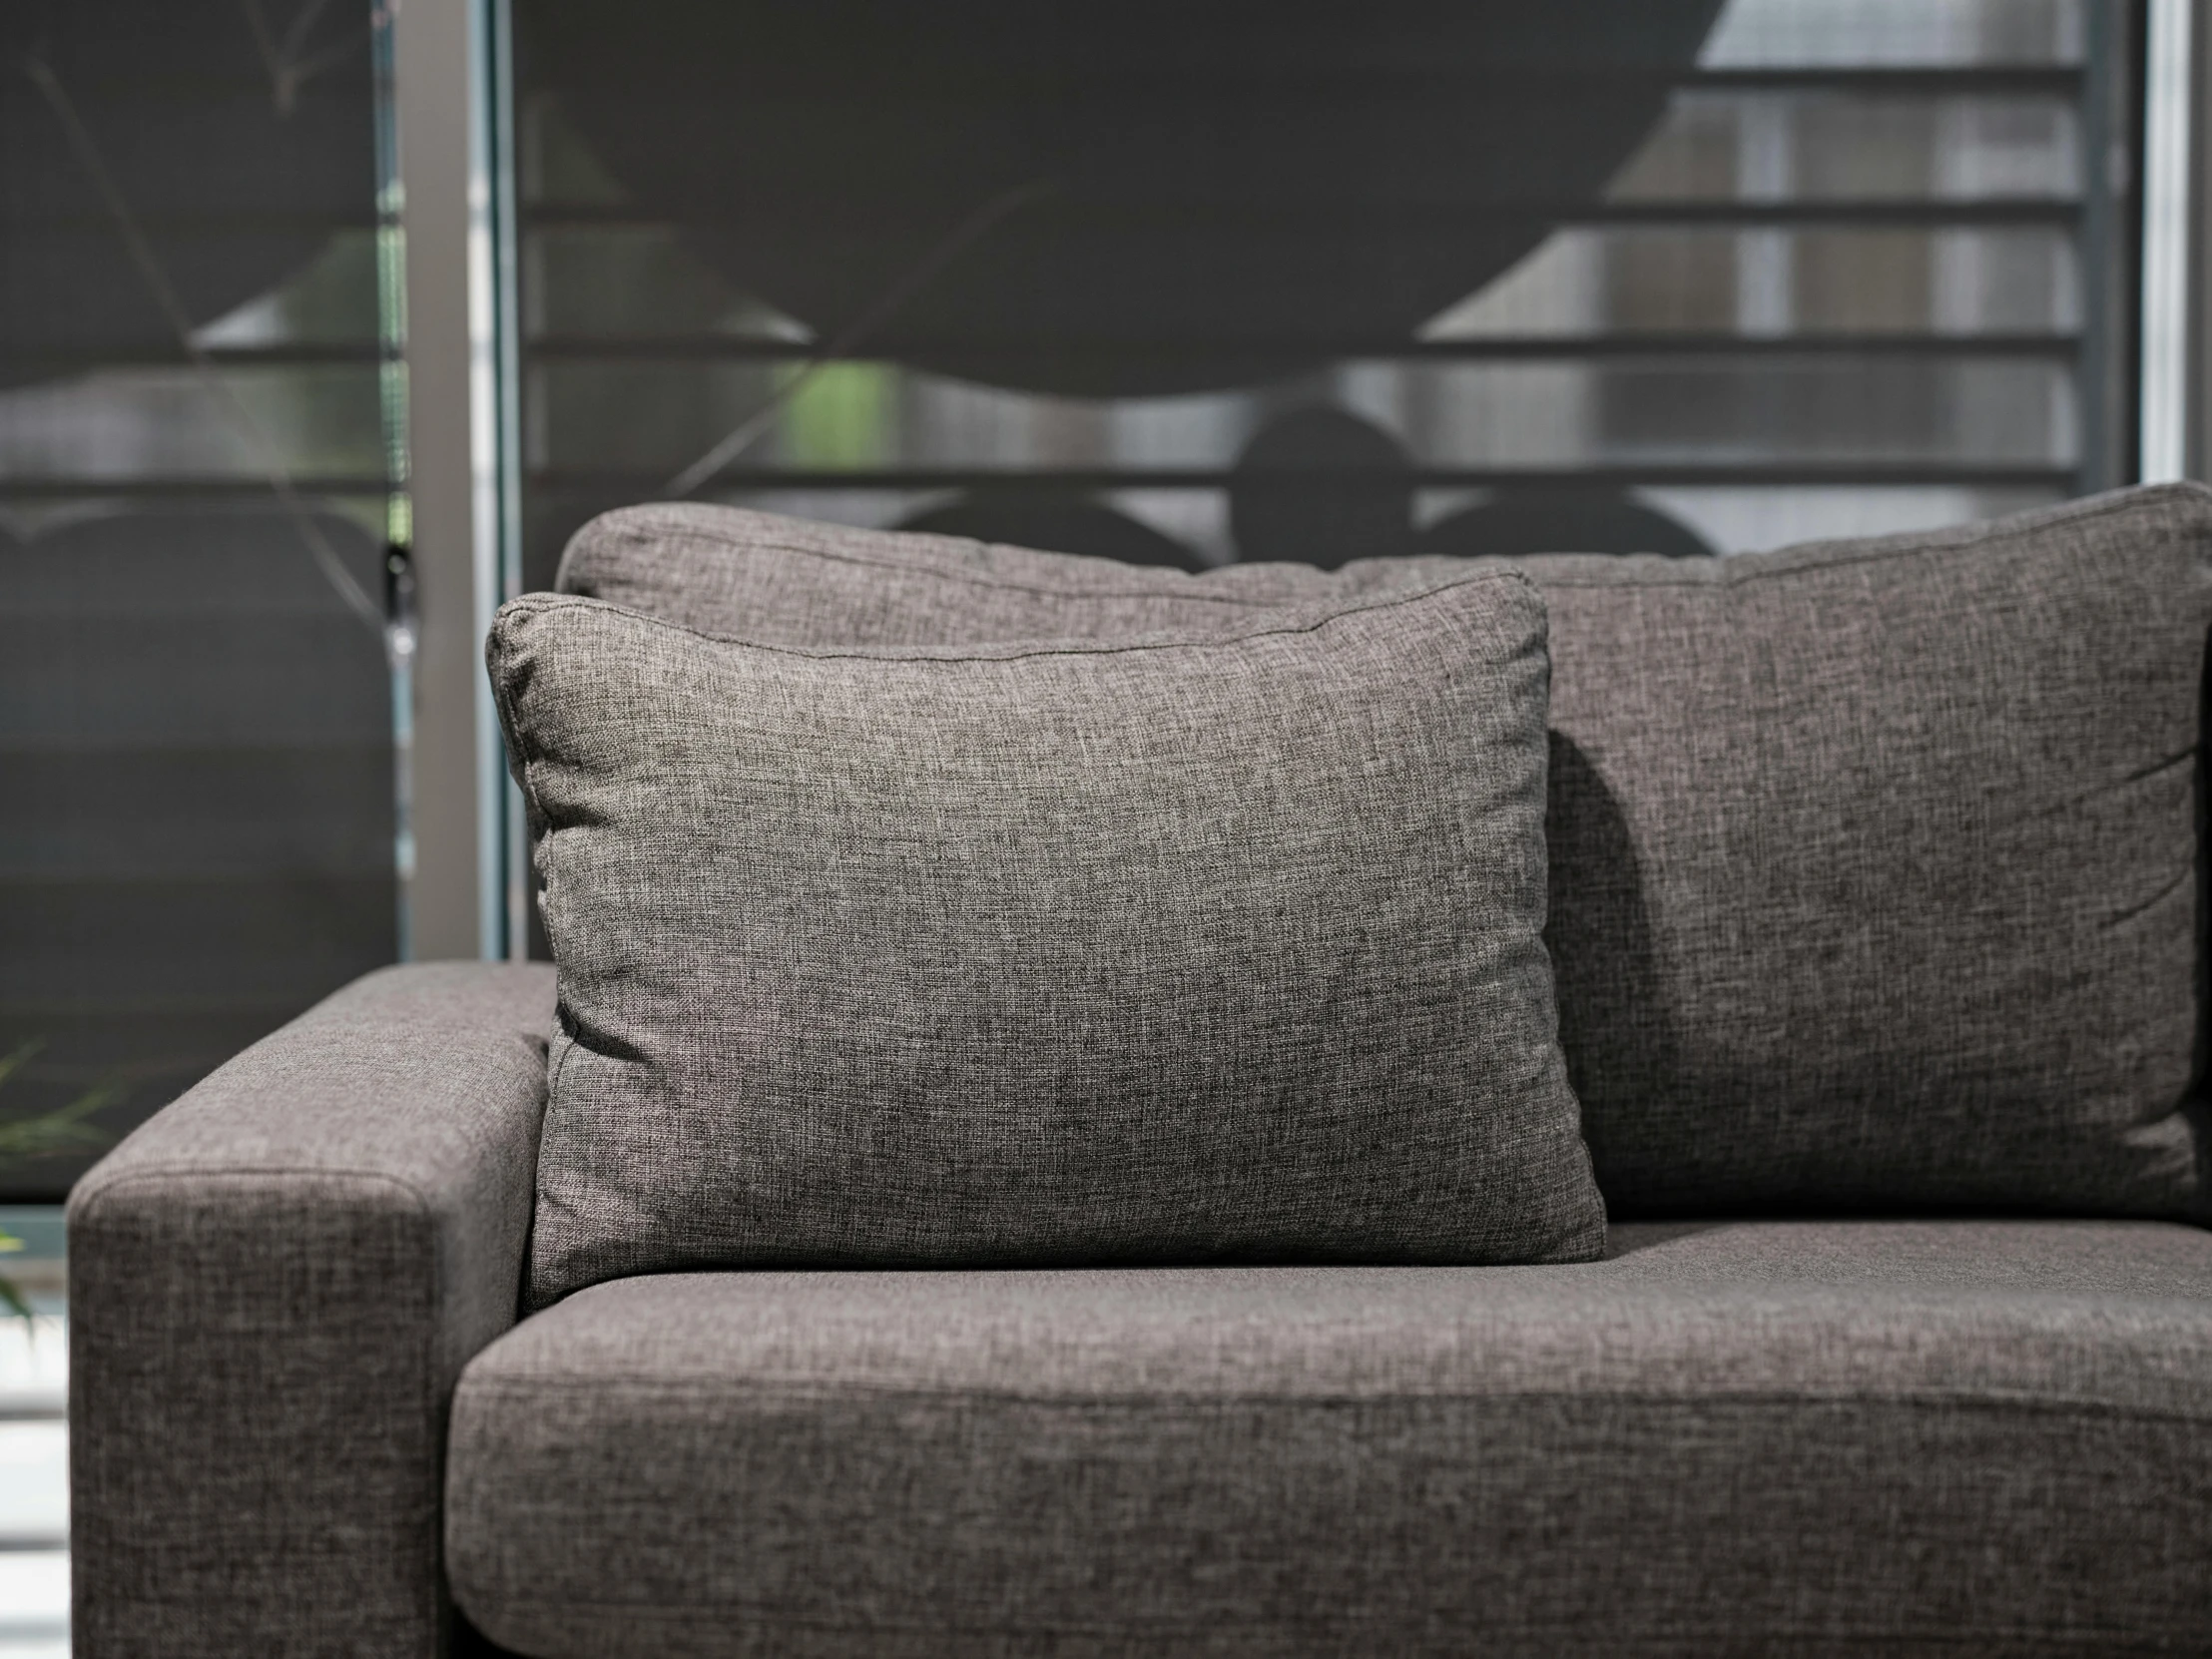 a gray couch with pillows is shown with a wall - to - floor window